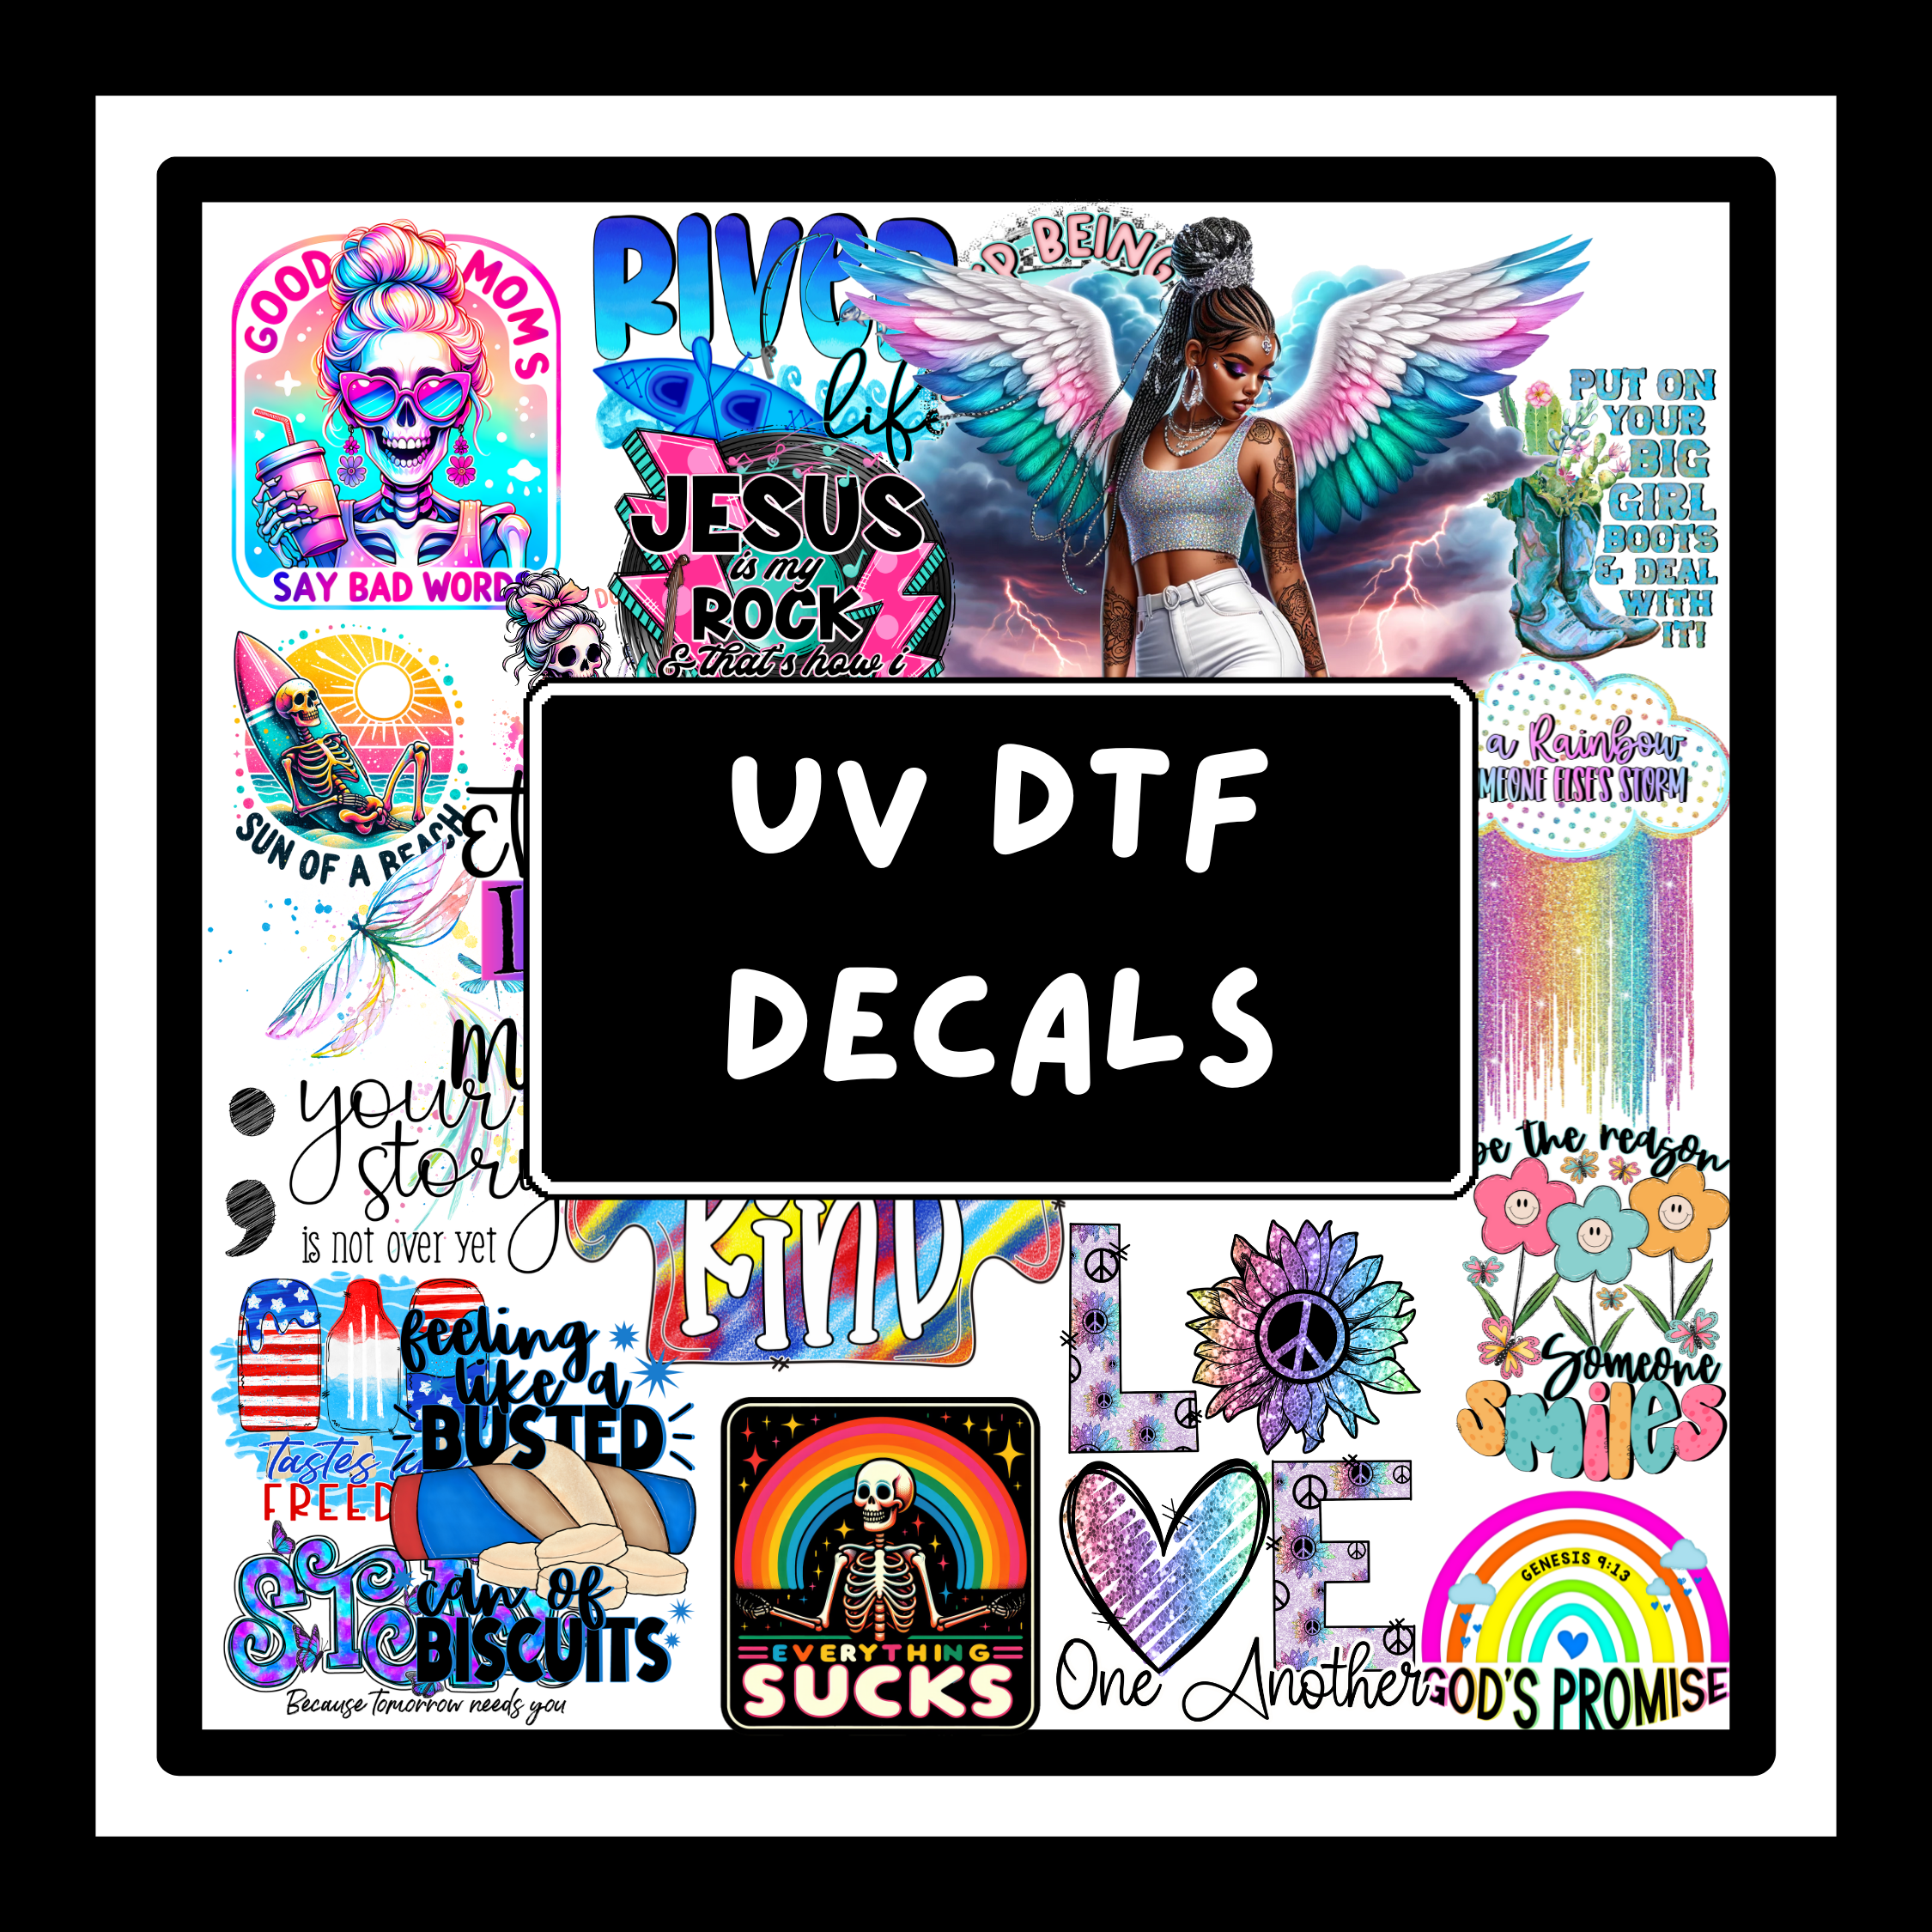 You Should See UV DTF Decal –